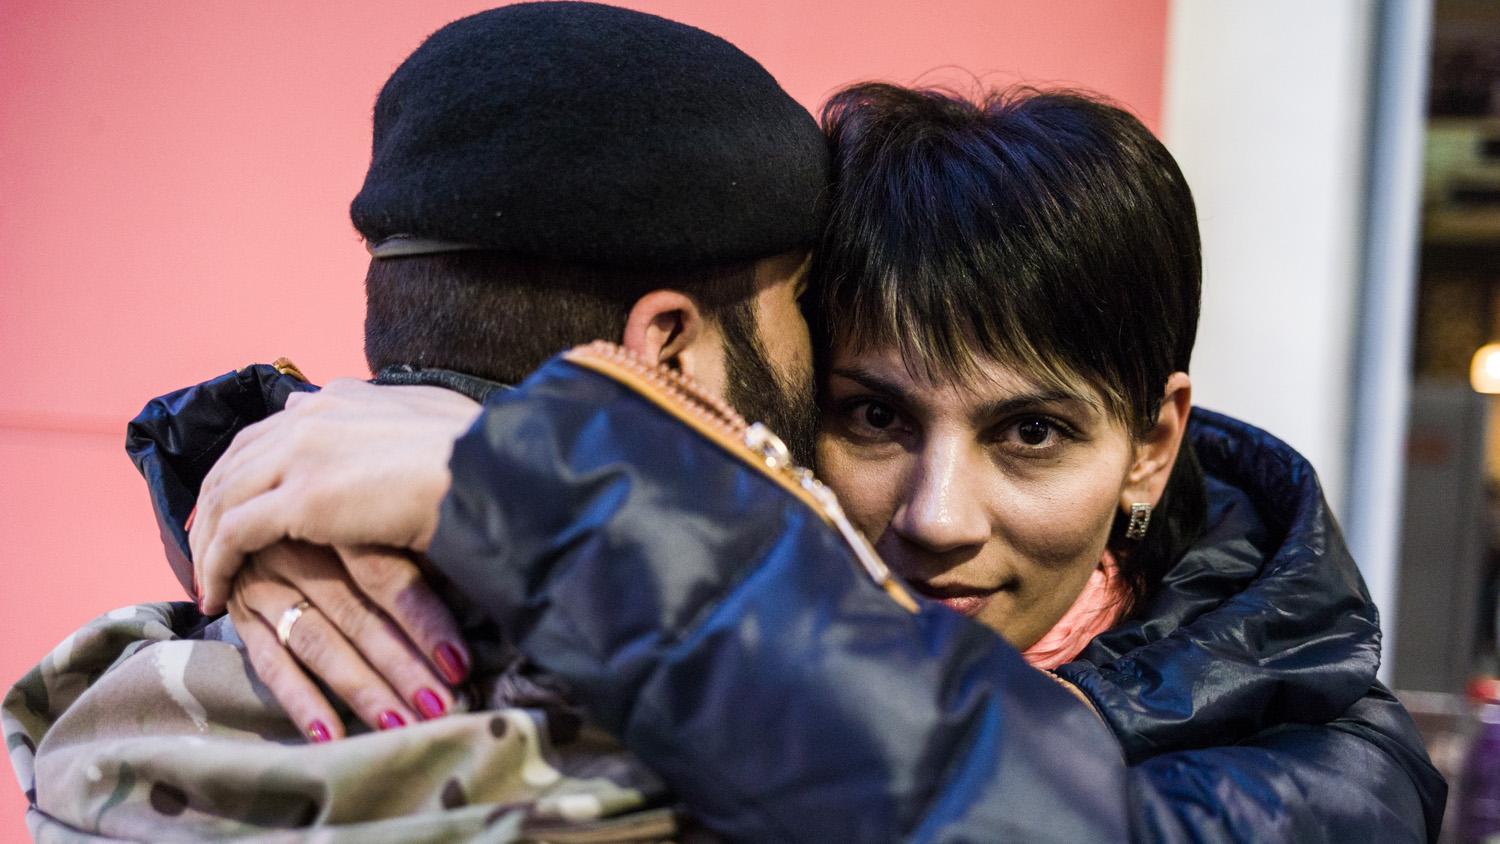 Elmaz and her husband, Timur Barotov, refugees from Crimea who now live in Lviv, Ukraine